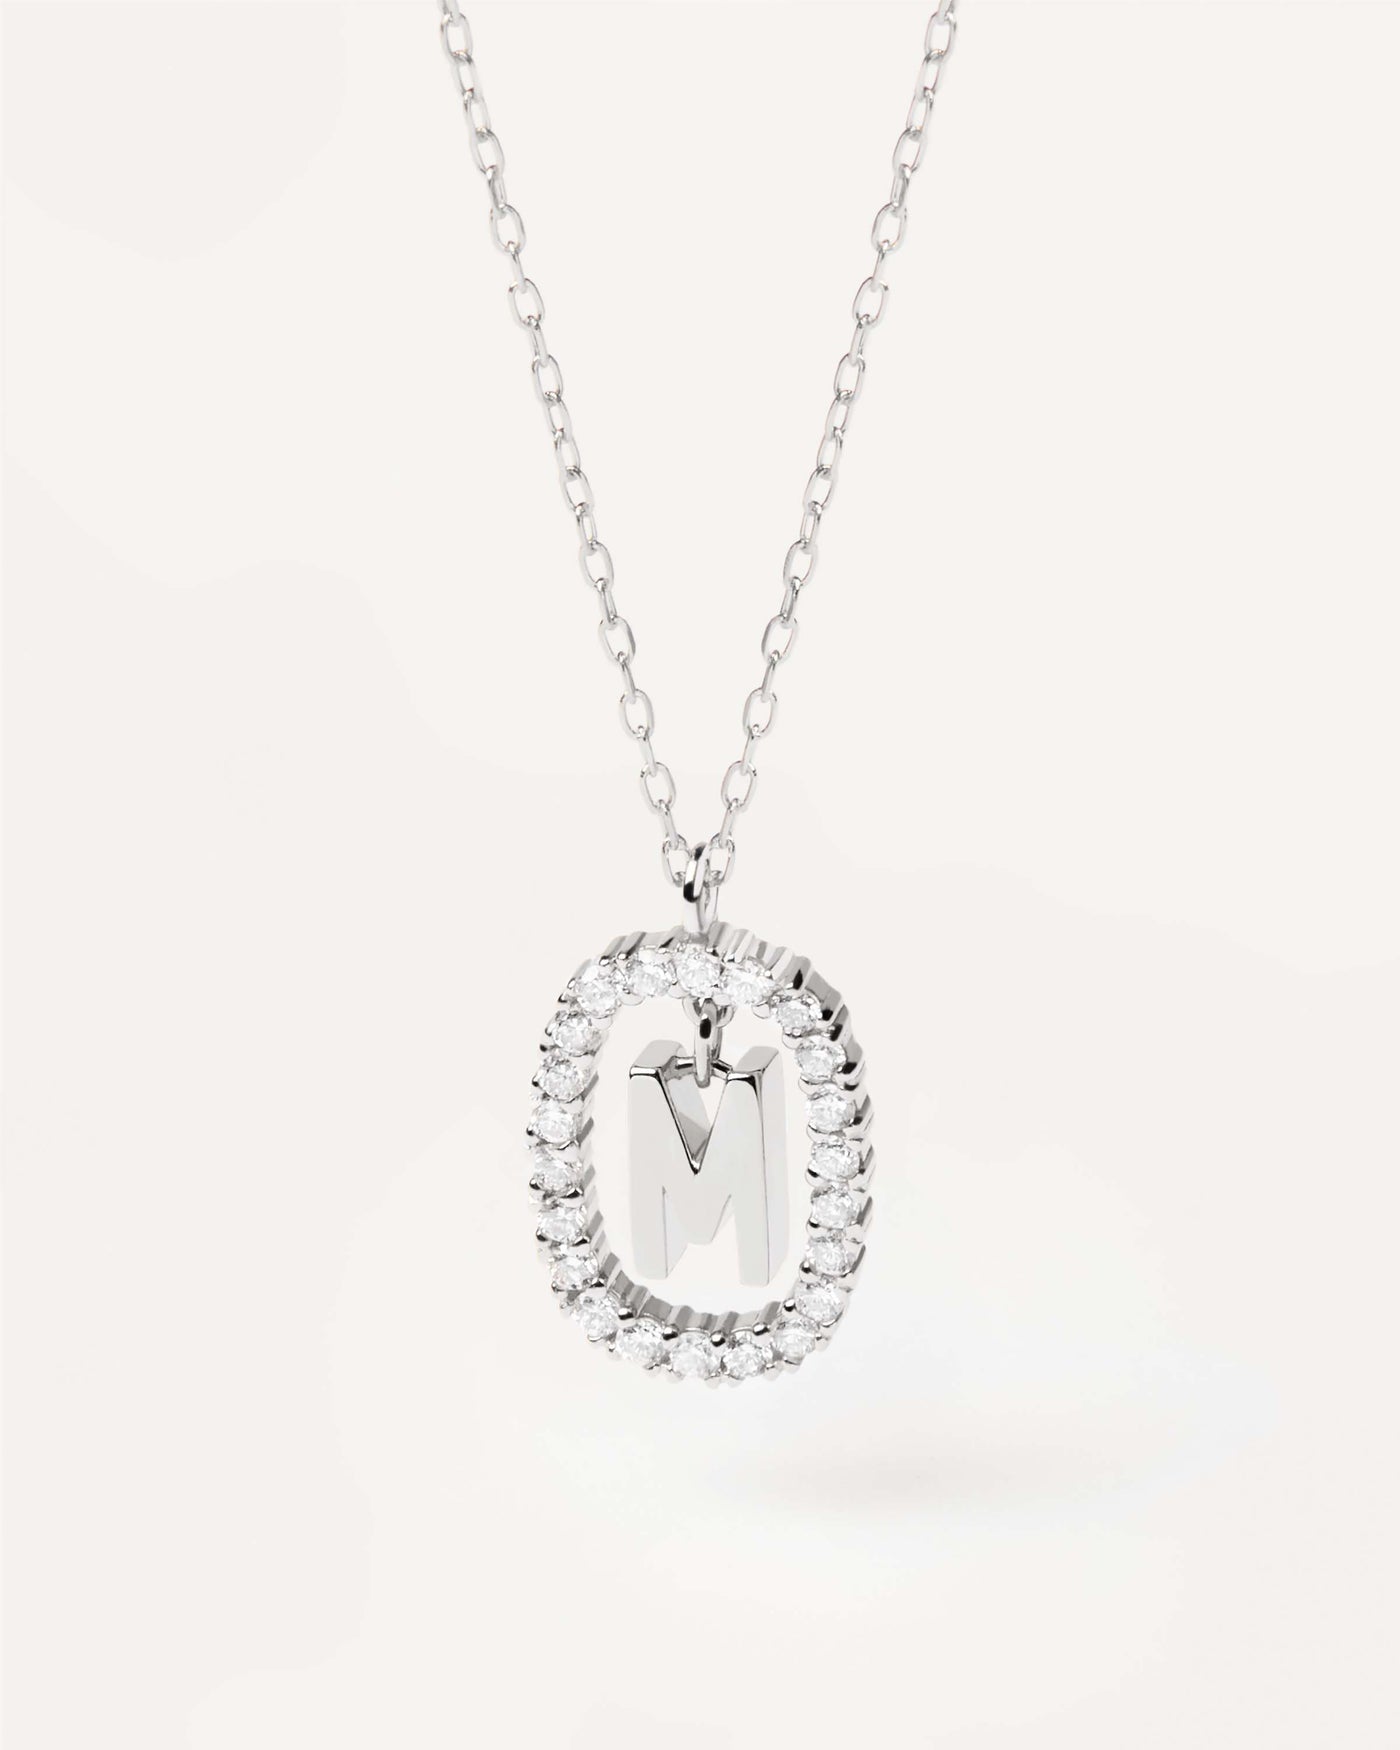 Diamonds and White Gold Letter M Necklace - 18K solid white gold